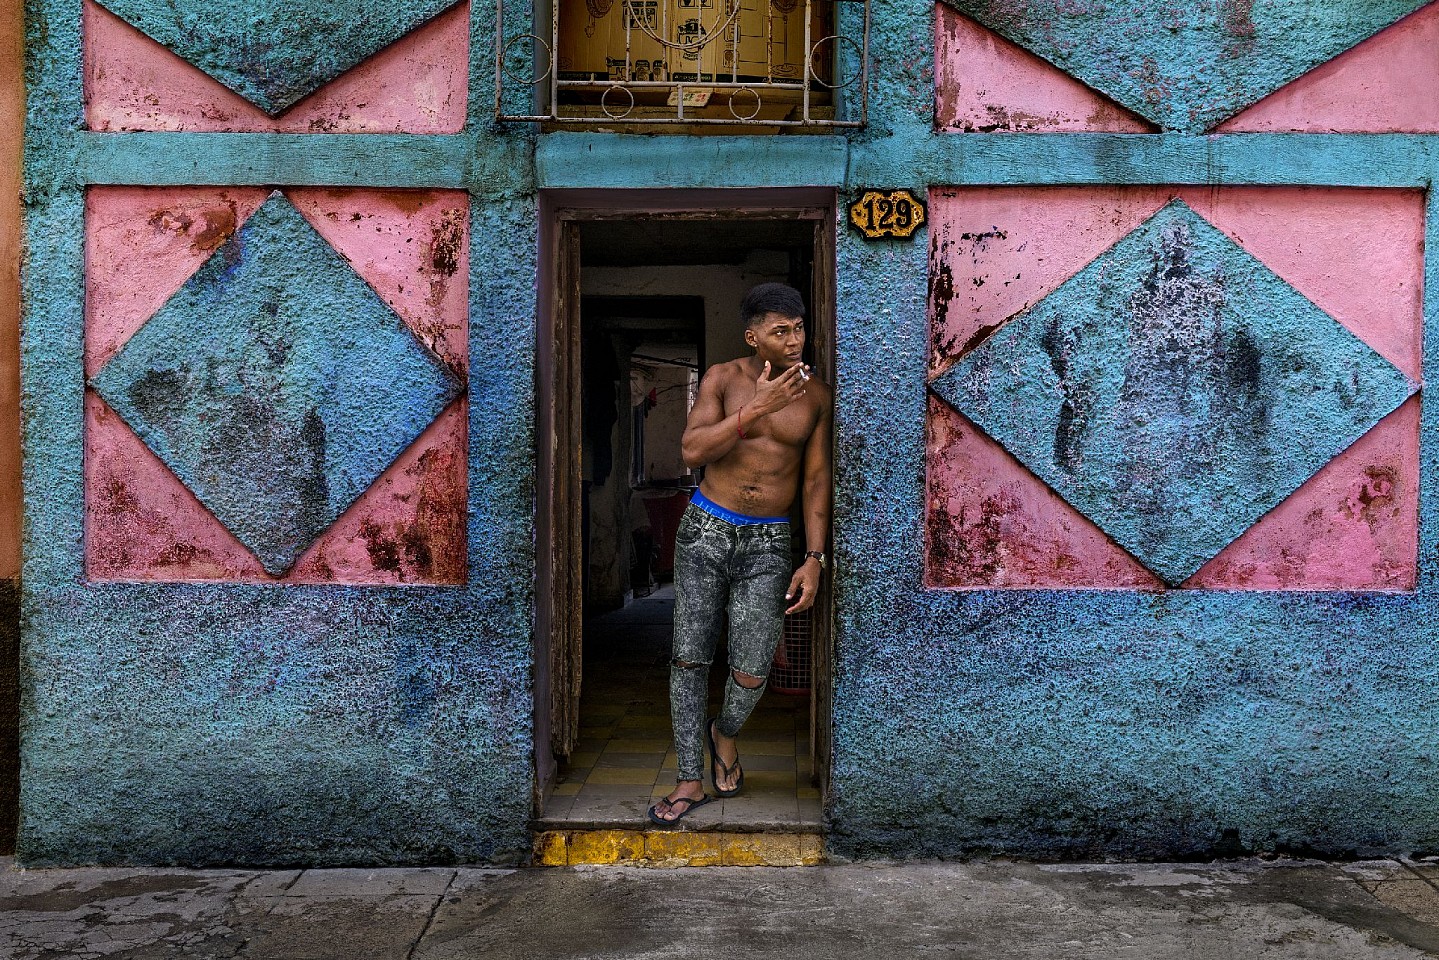 Steve McCurry, Man Smokes in Doorway, 2019
FujiFlex Crystal Archive Print
Price/Size on request